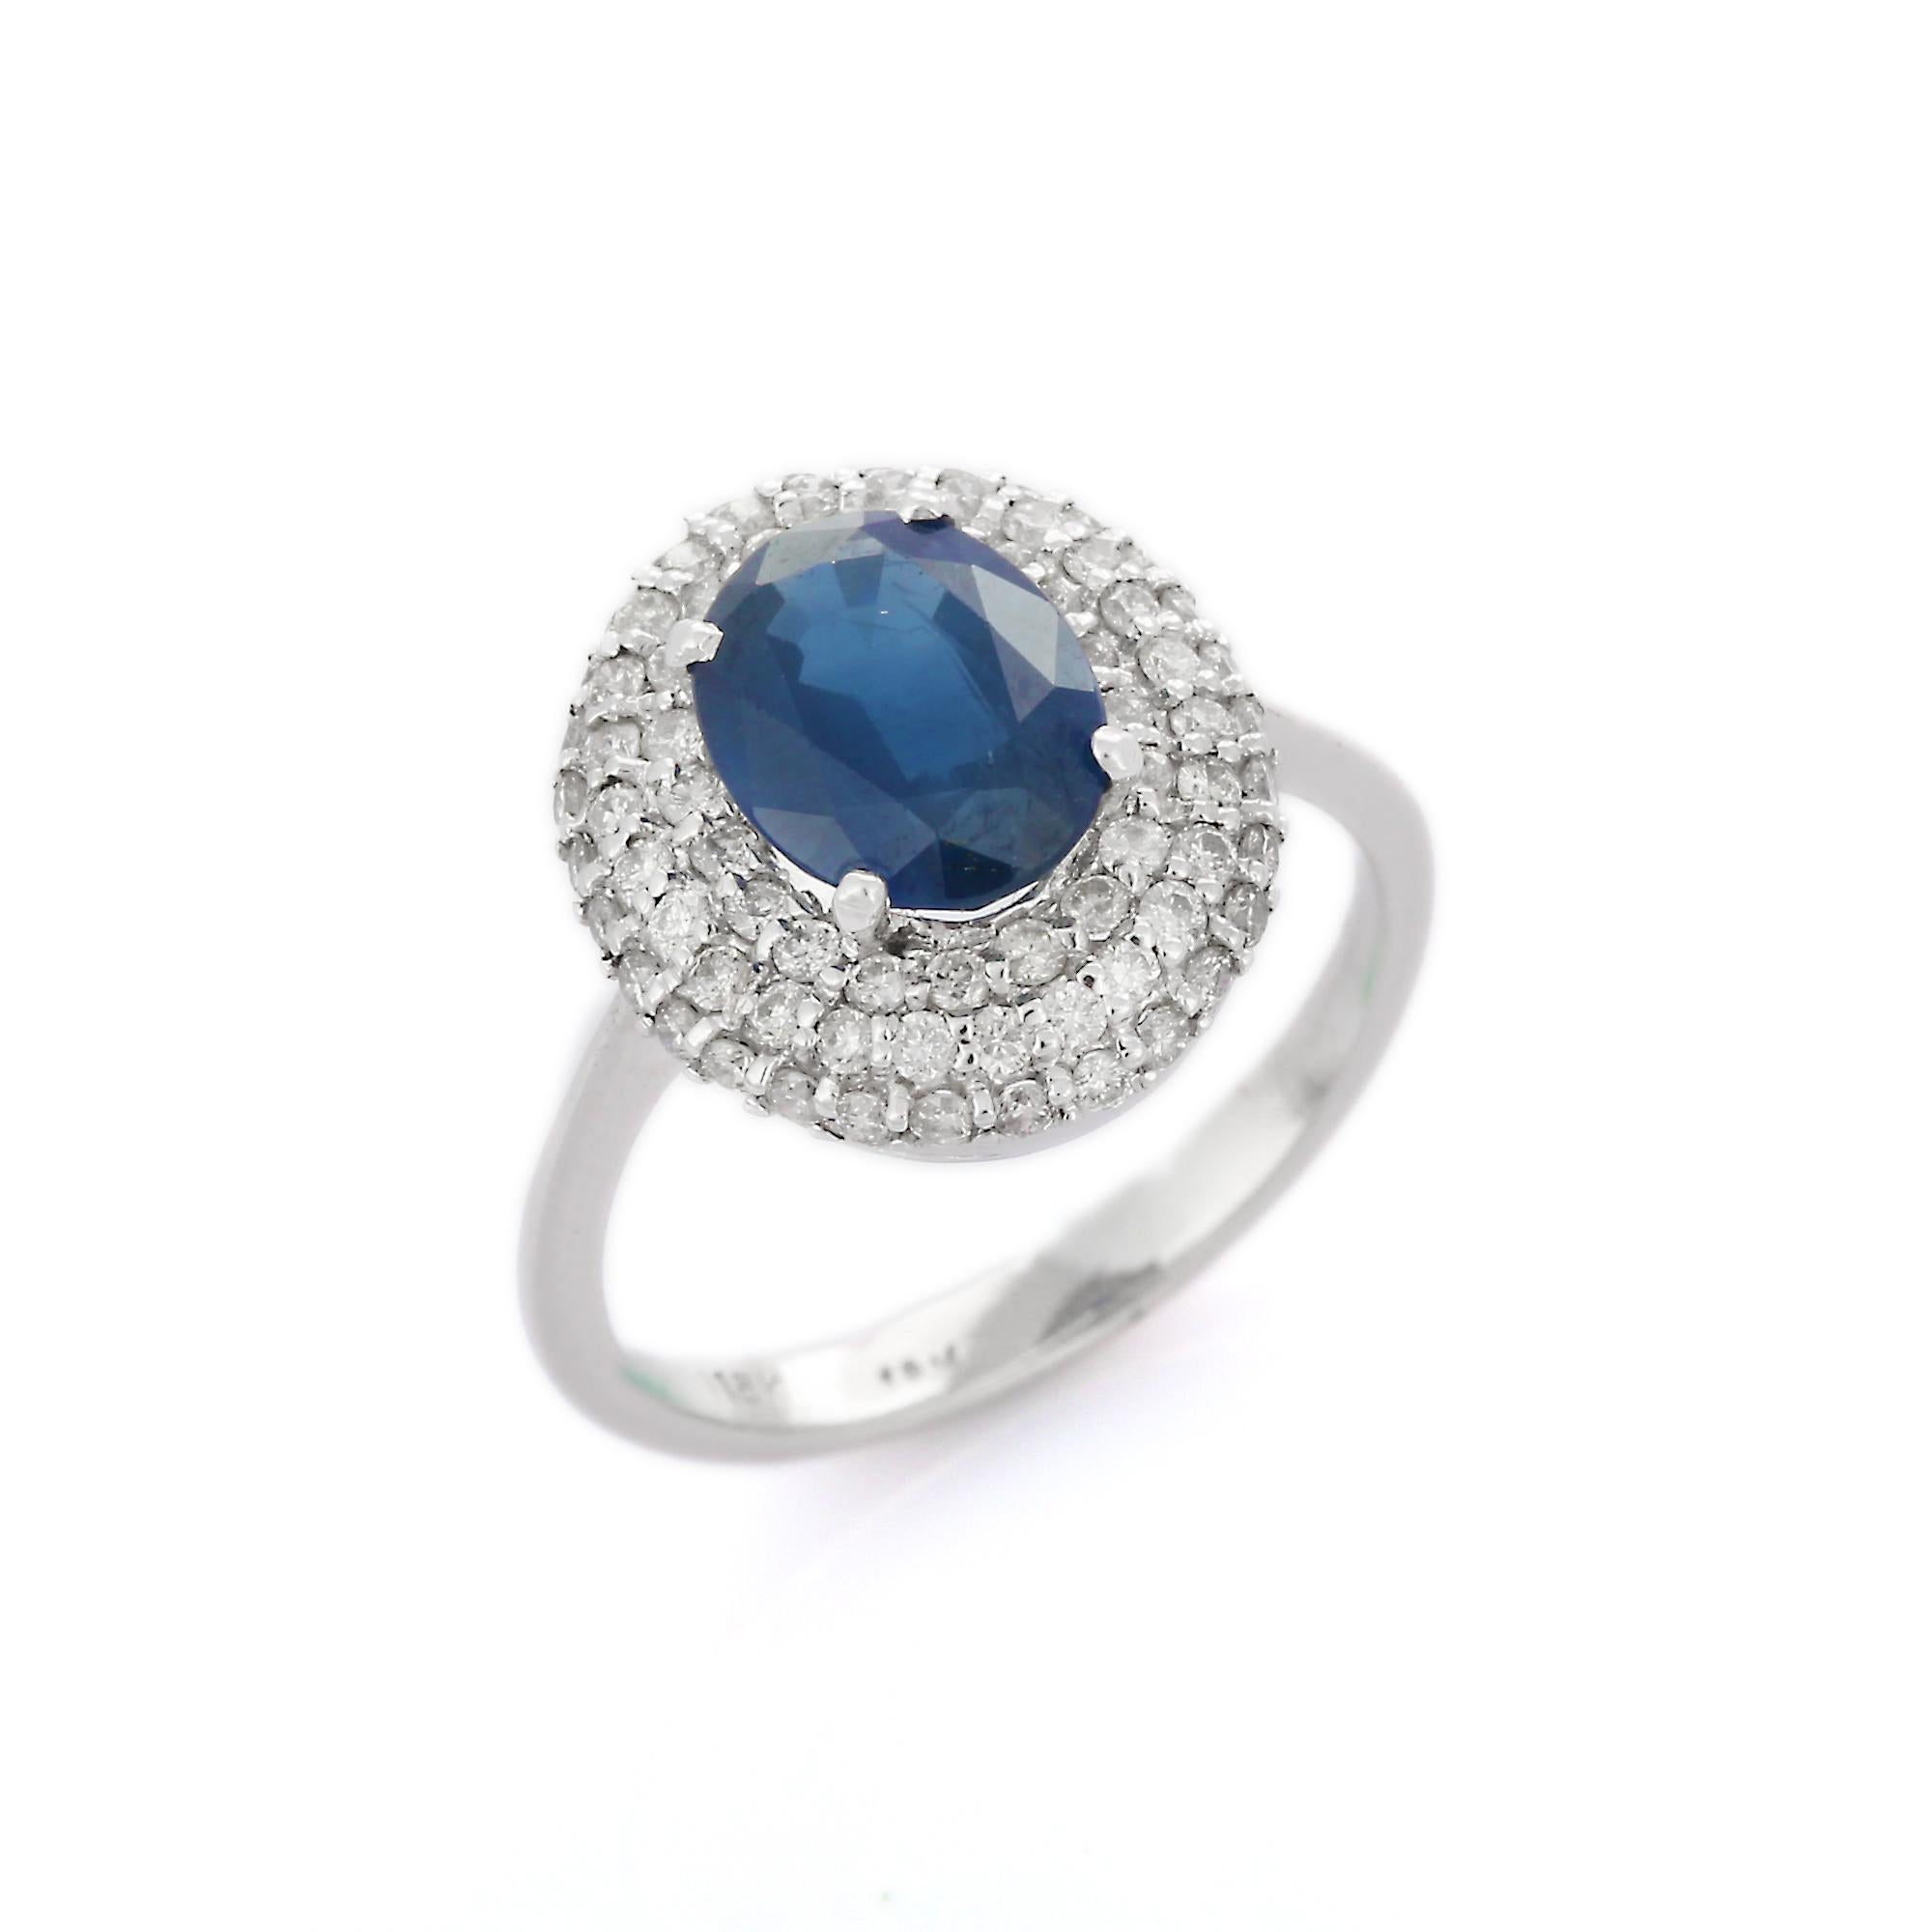 For Sale:  Blue Sapphire Diamond Big Round Cocktail Ring in 18K White Gold 5